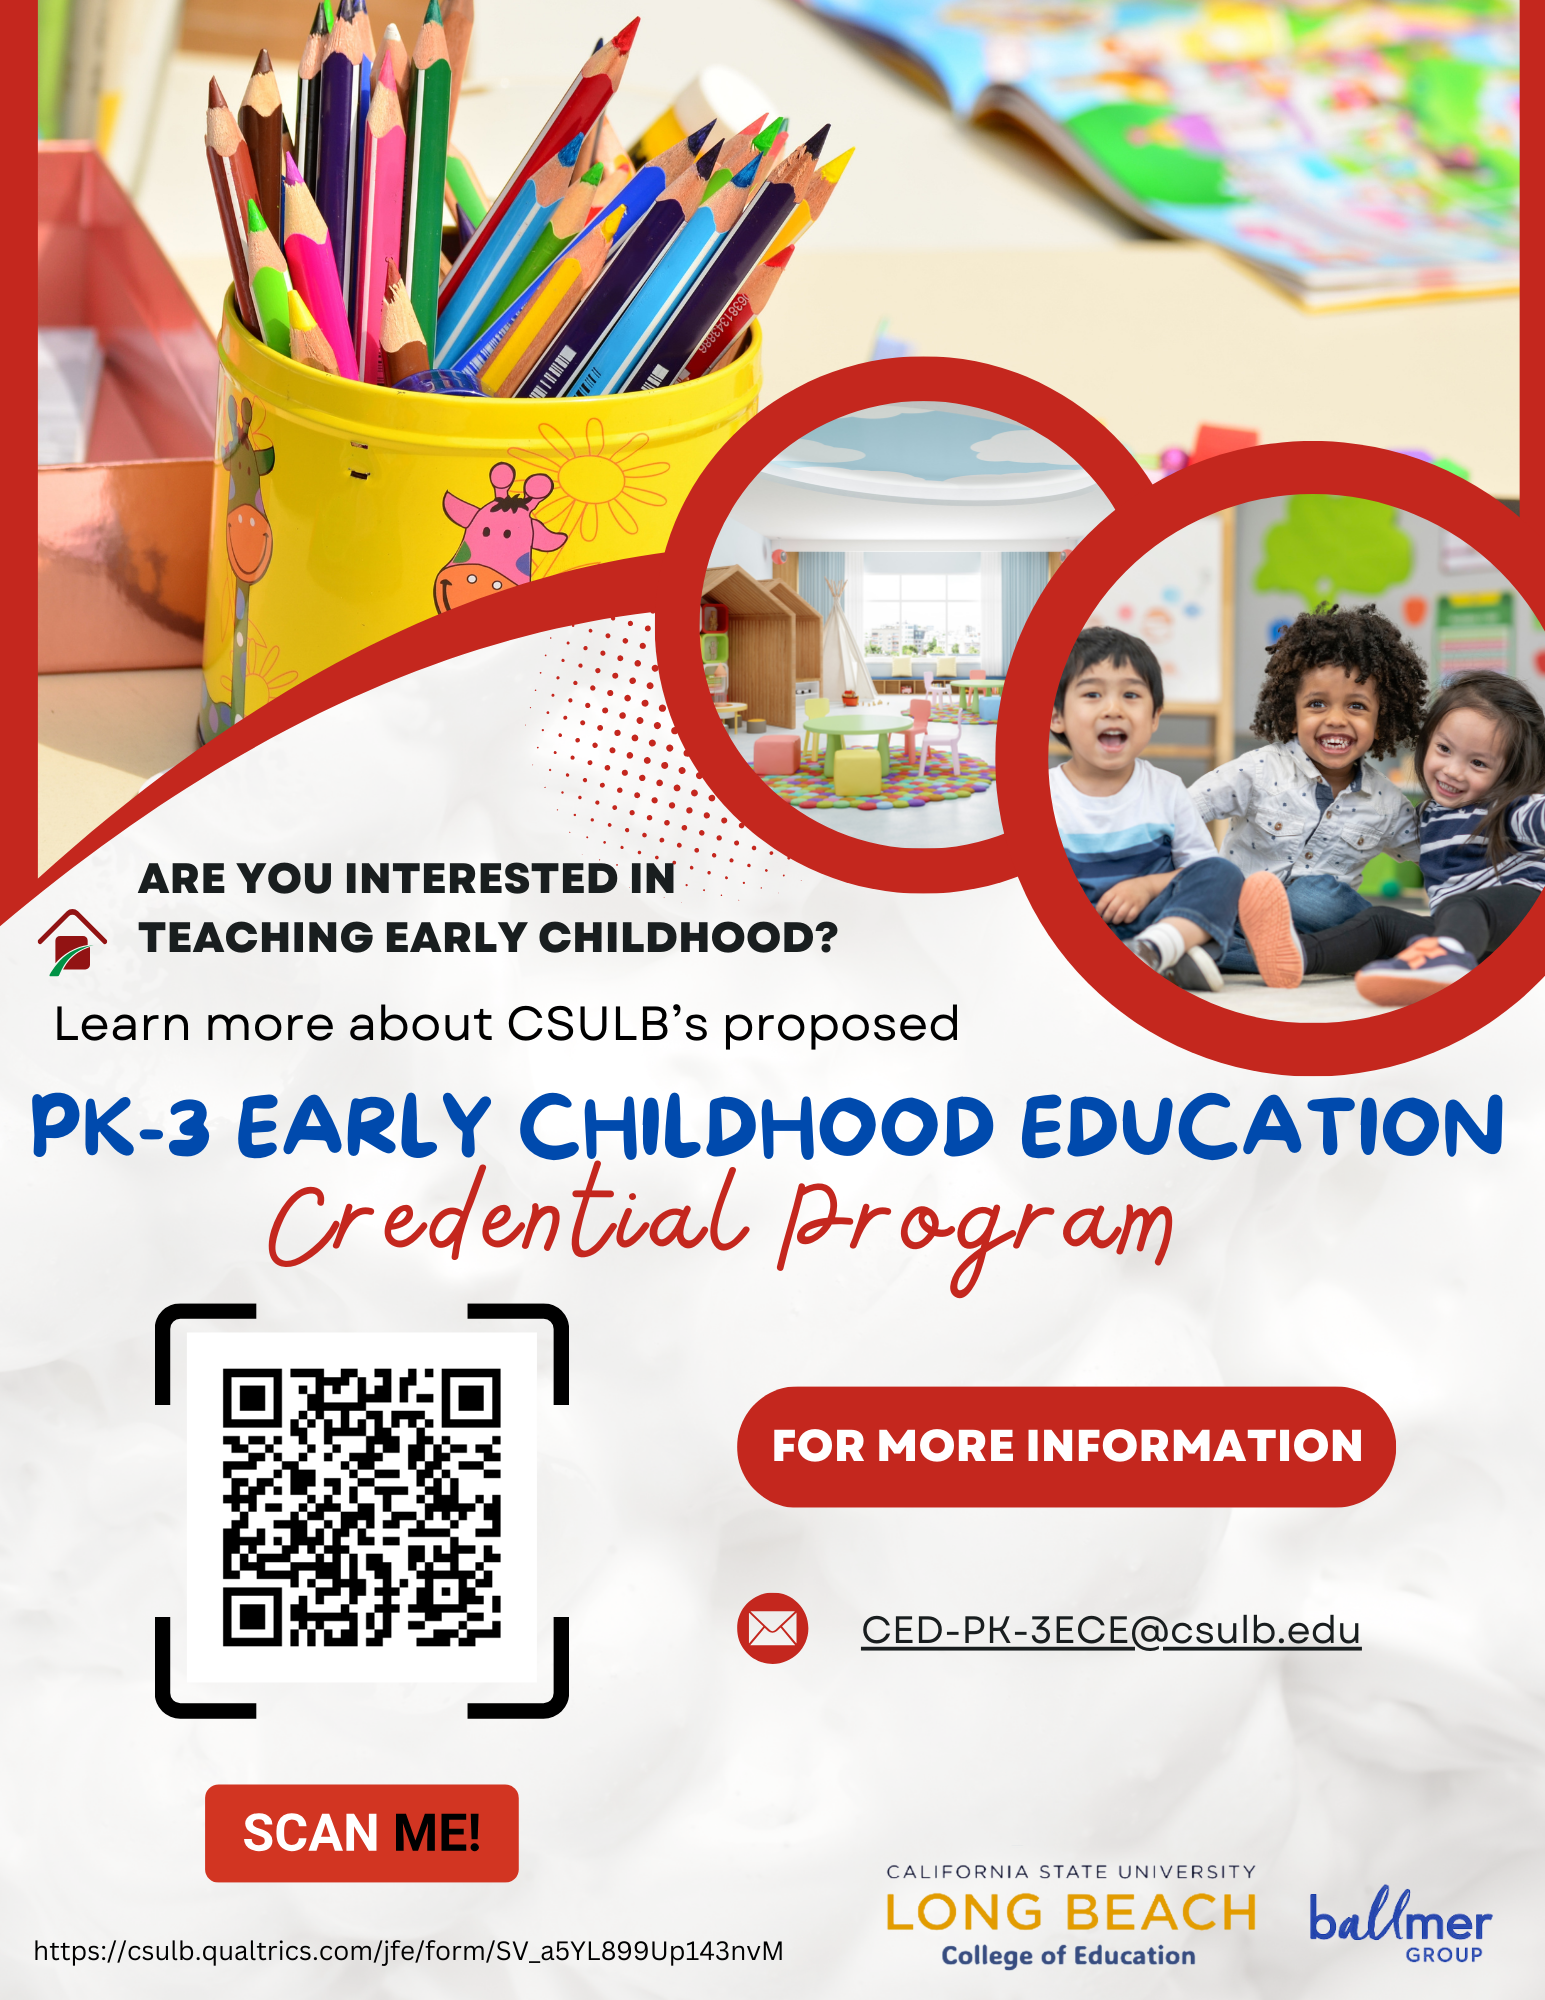 PK-3 Early Childhood Education Credential Program flyer. Please use URL link or QR code to add your name to the interest list for this proposed credential.